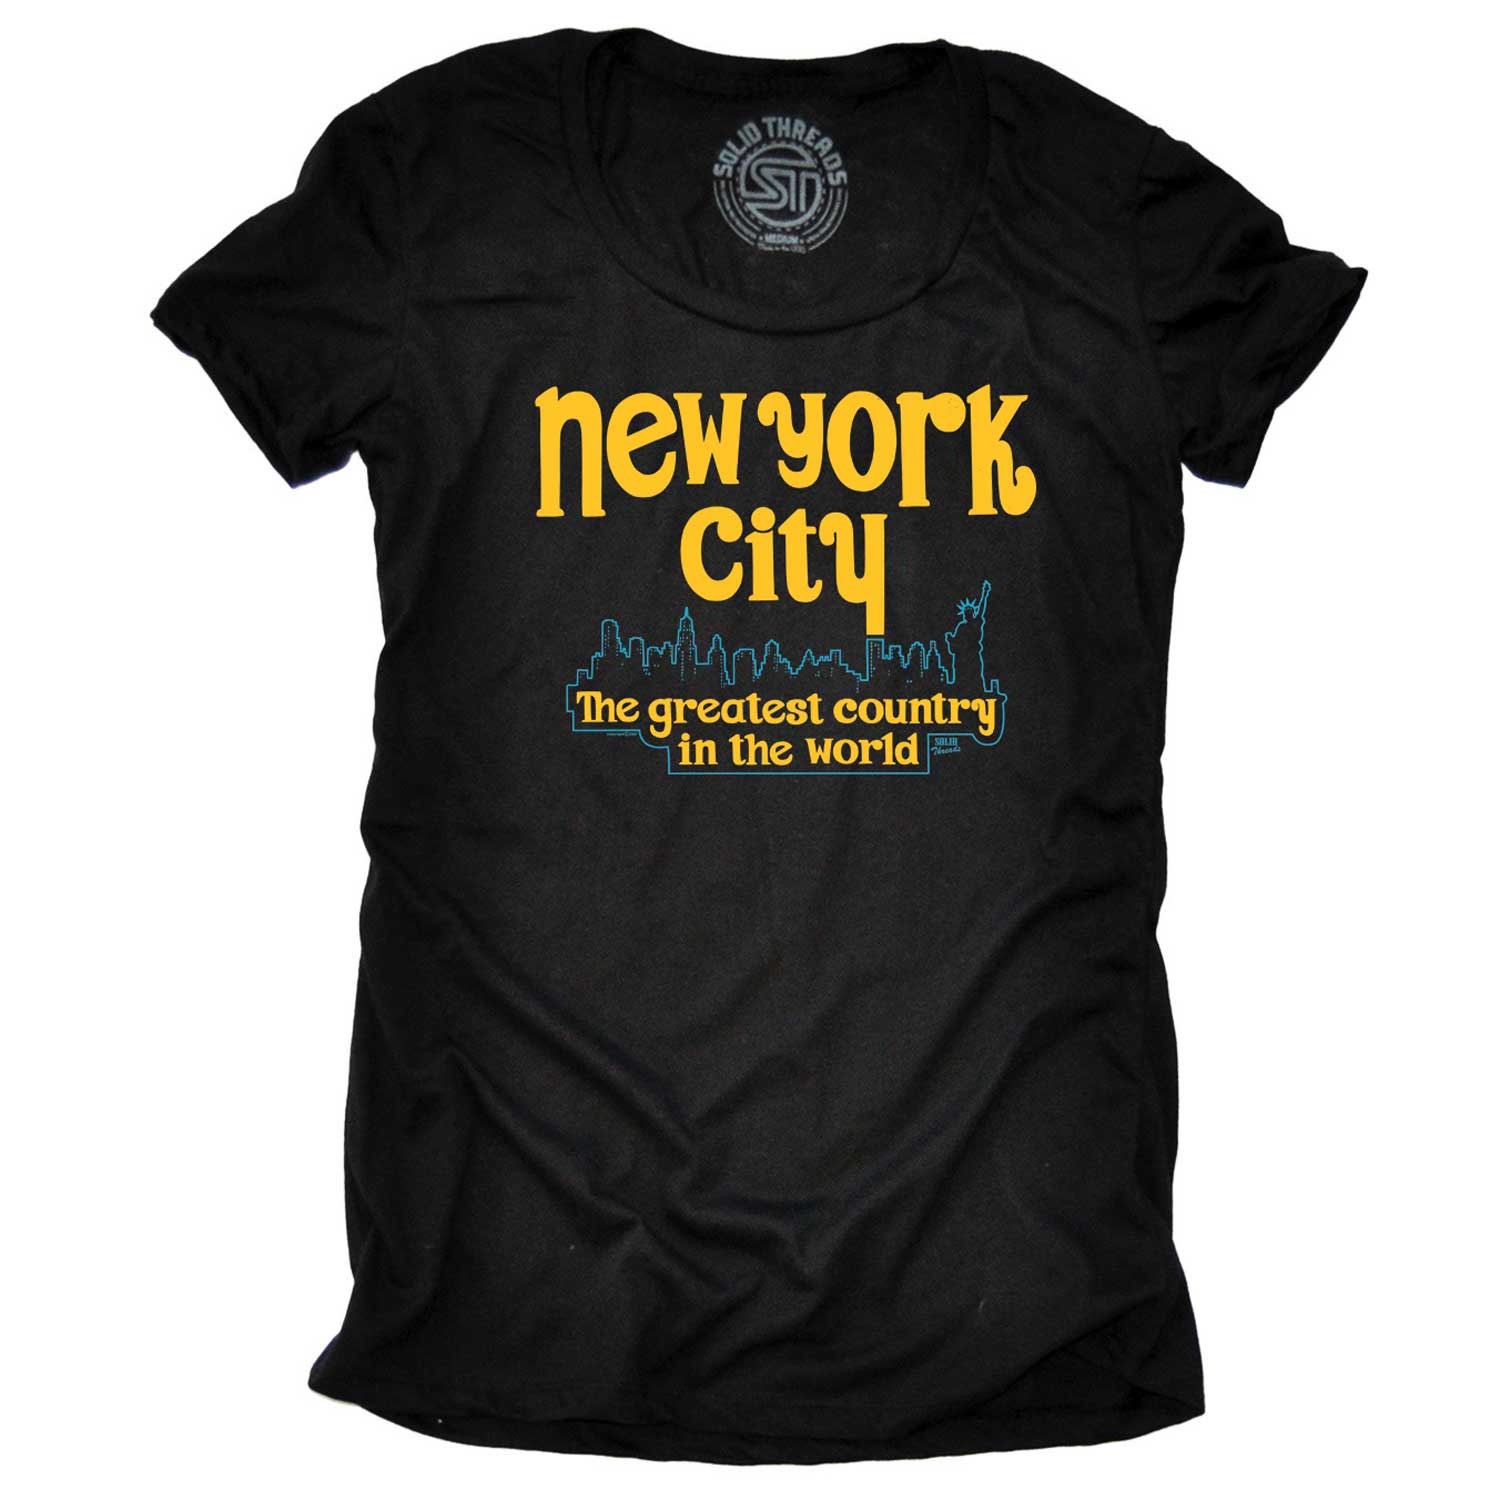 Women's New York City Greatest Country Vintage Graphic T-Shirt | Funny Big Apple Tee | Solid Threads